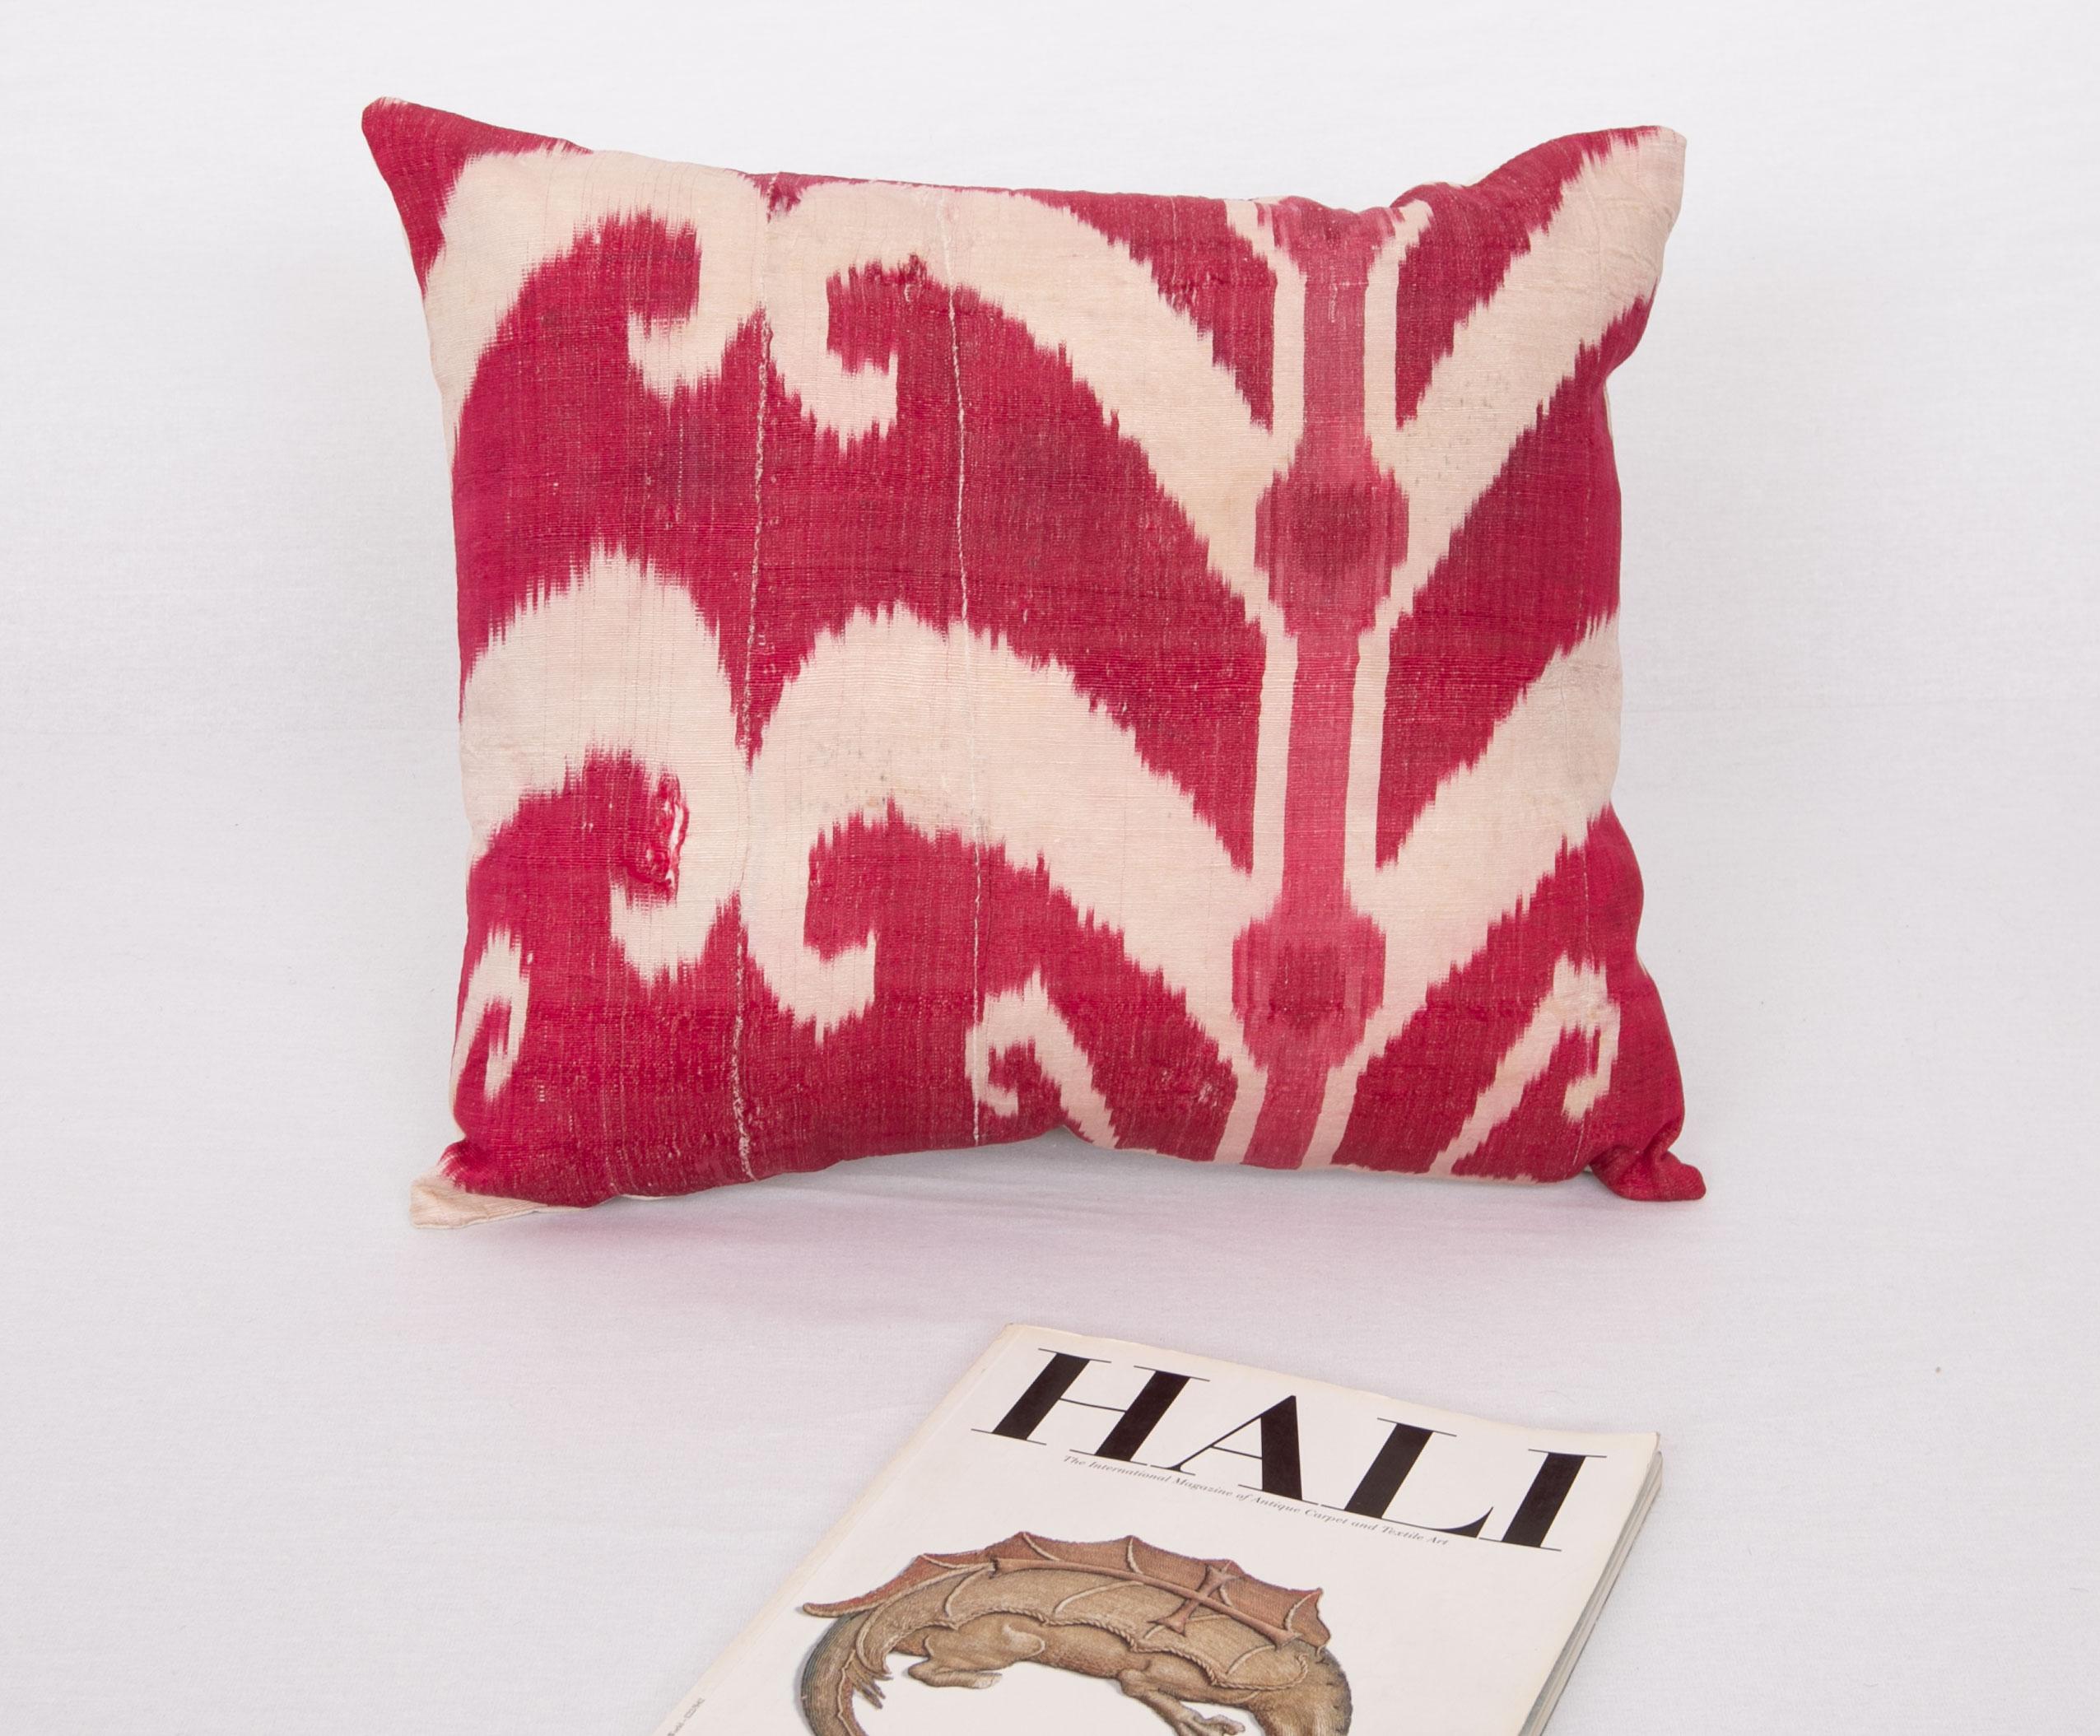 Uzbek Ikat Pillow Cover Made from an Antique Silk and Cotton Ikat For Sale